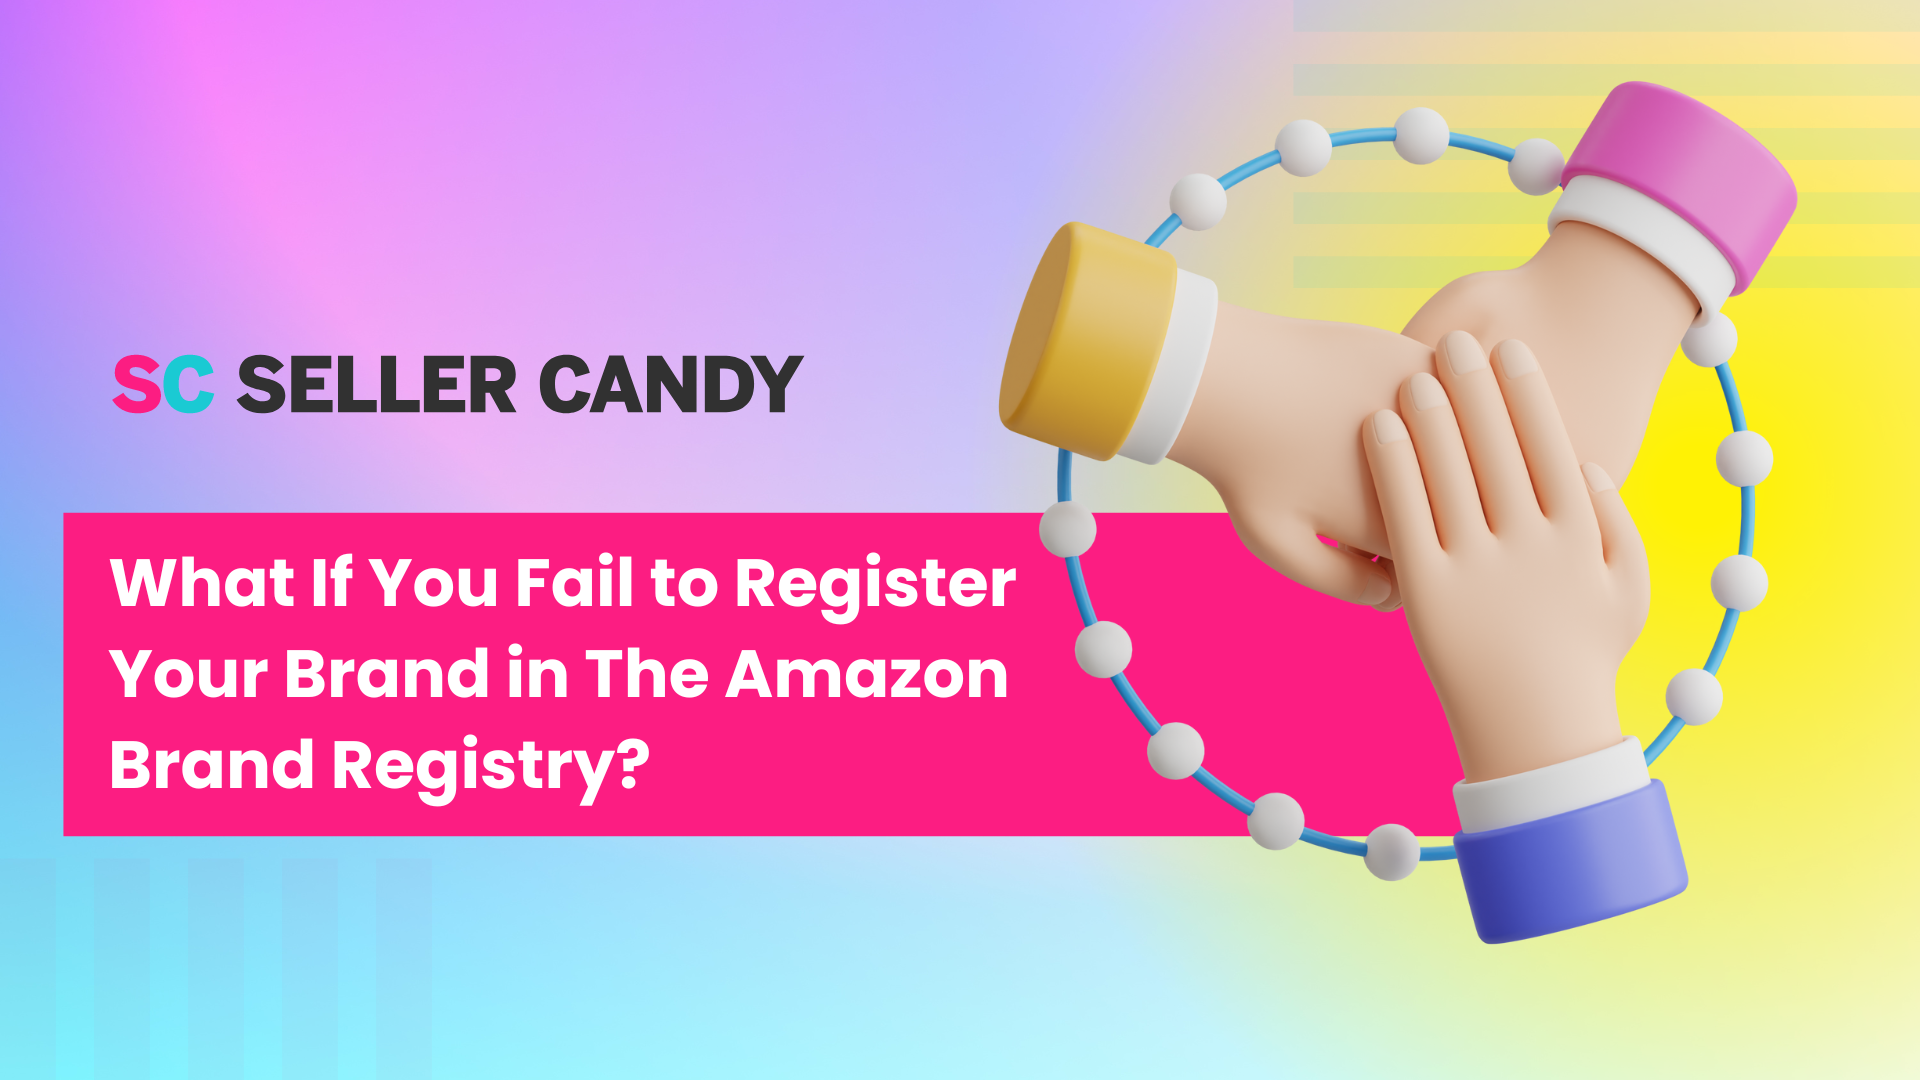 What If You Fail to Register Your Brand in The Amazon Brand Registry